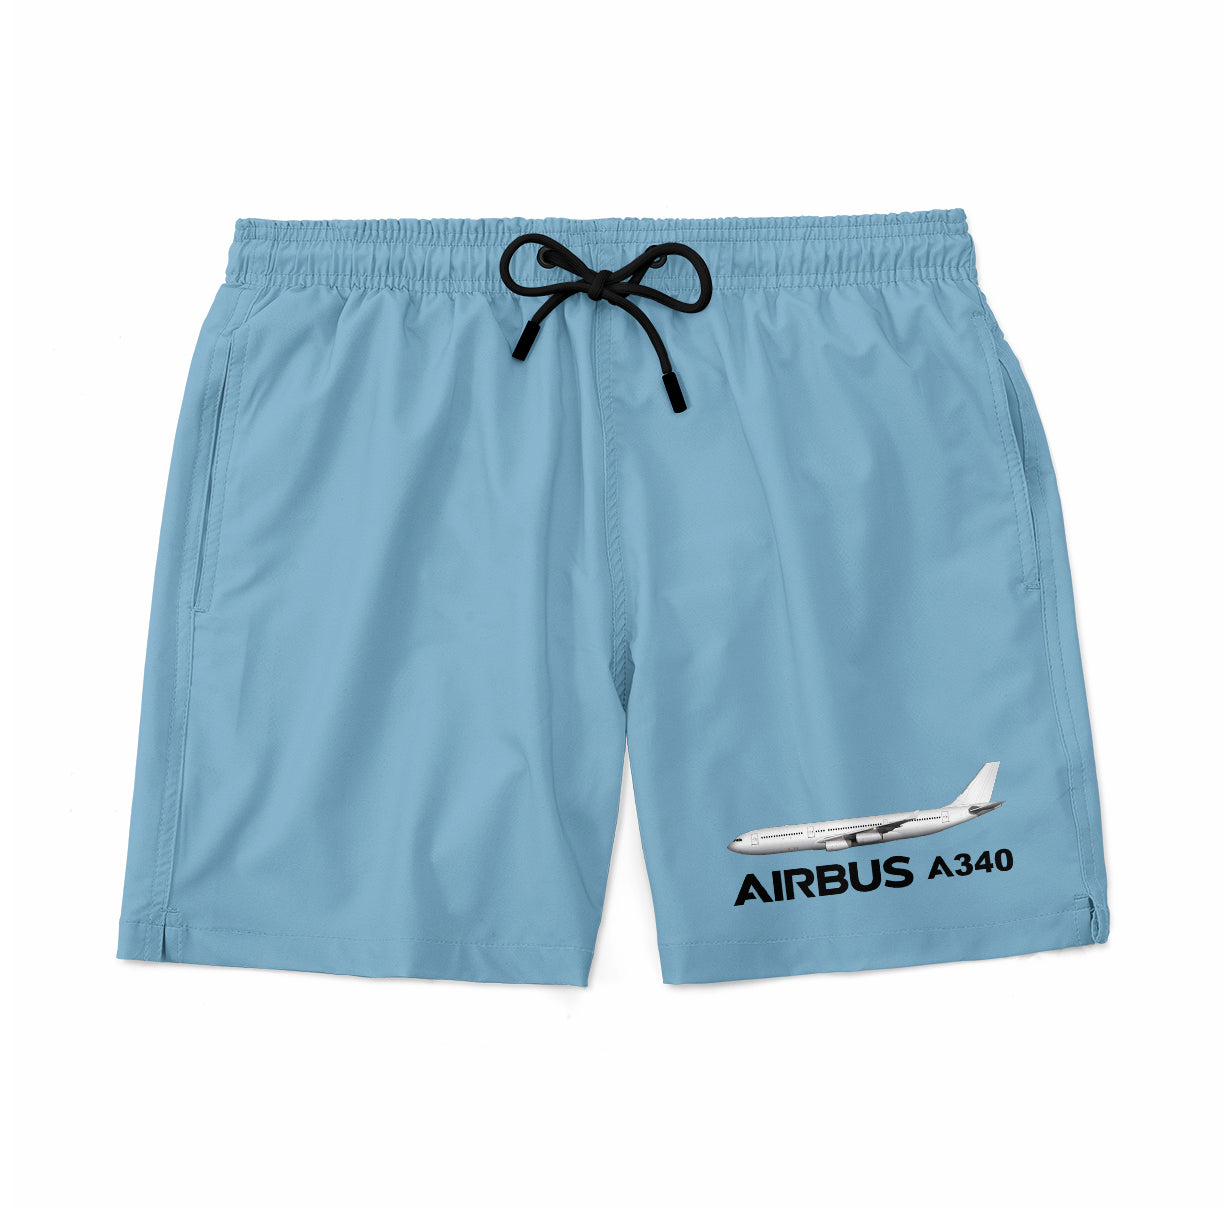 The Airbus A340 Designed Swim Trunks & Shorts